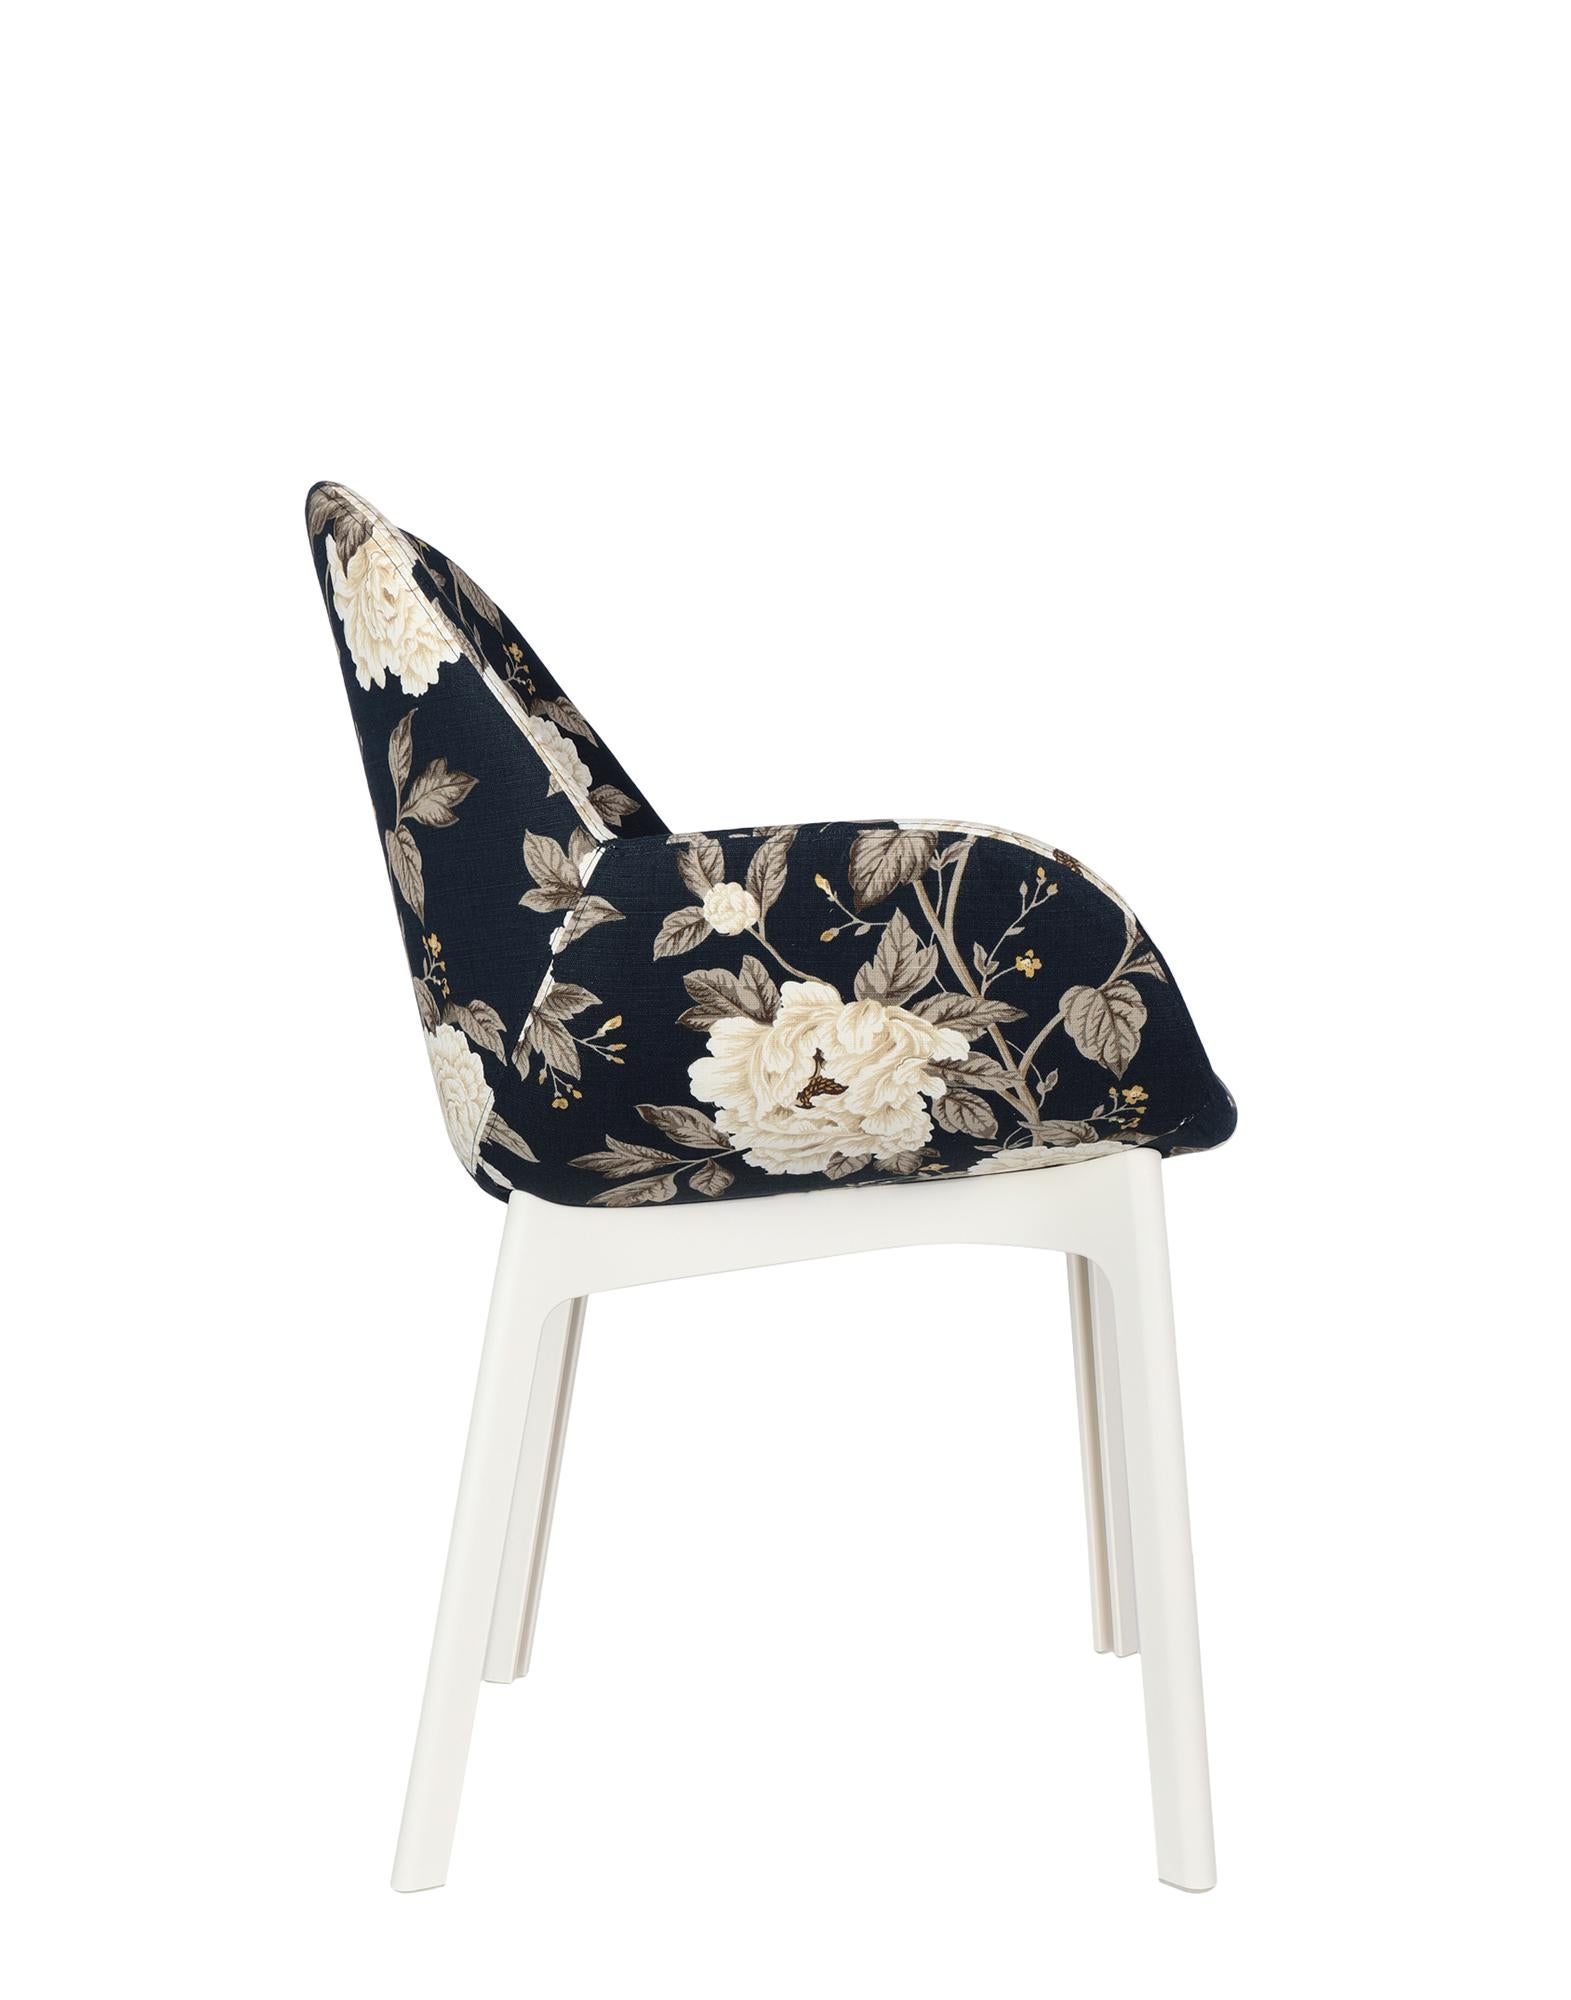 Italian Kartell Clap Chair by Patricia Urquiola in Peony Pattern For Sale